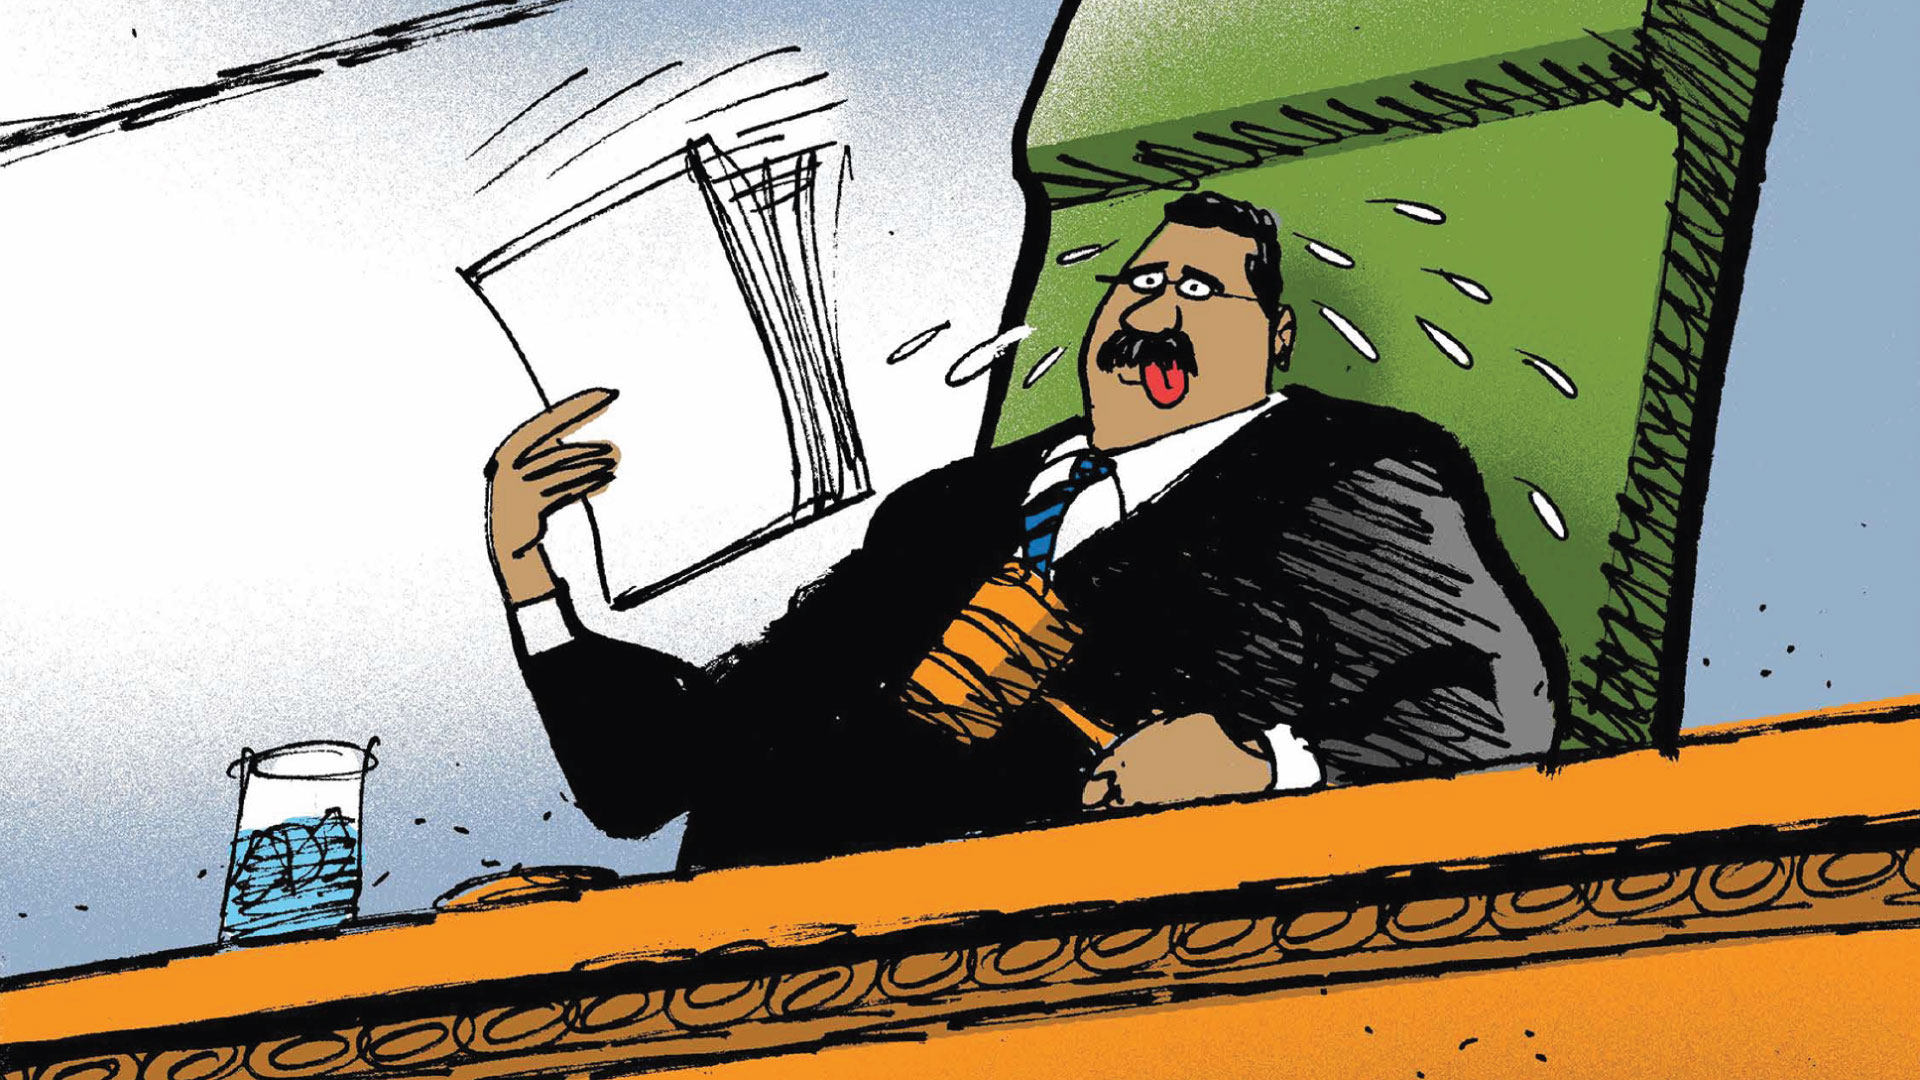 Cartoon showing a judge sweating while holding a thick stack of papers